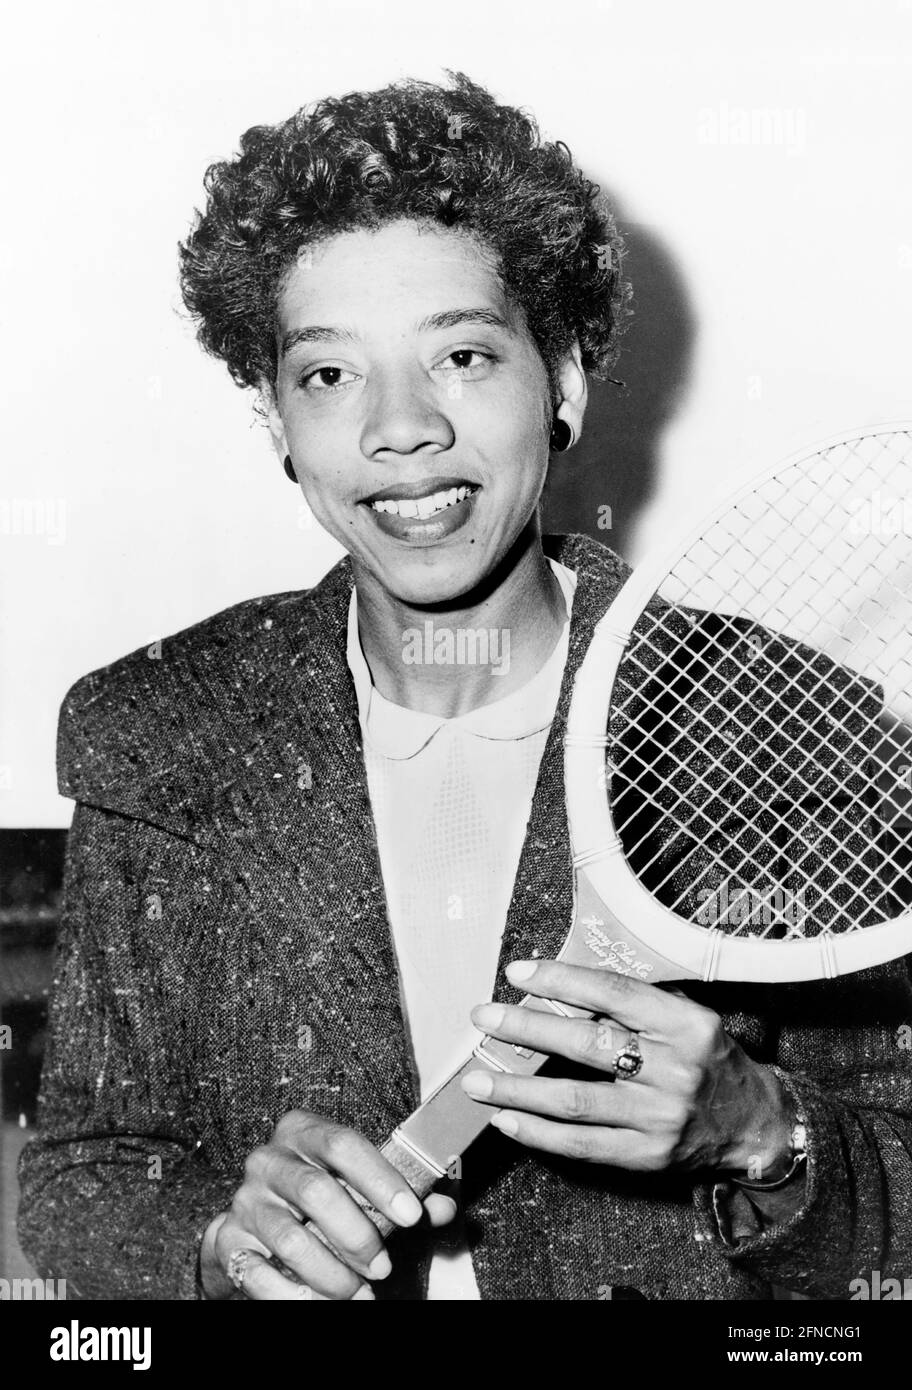 Althea Gibson. Portrait of American tennis player, Althea Neale Gibson (1927-2003) in 1956. Photo by Fred Palumbo. Stock Photo